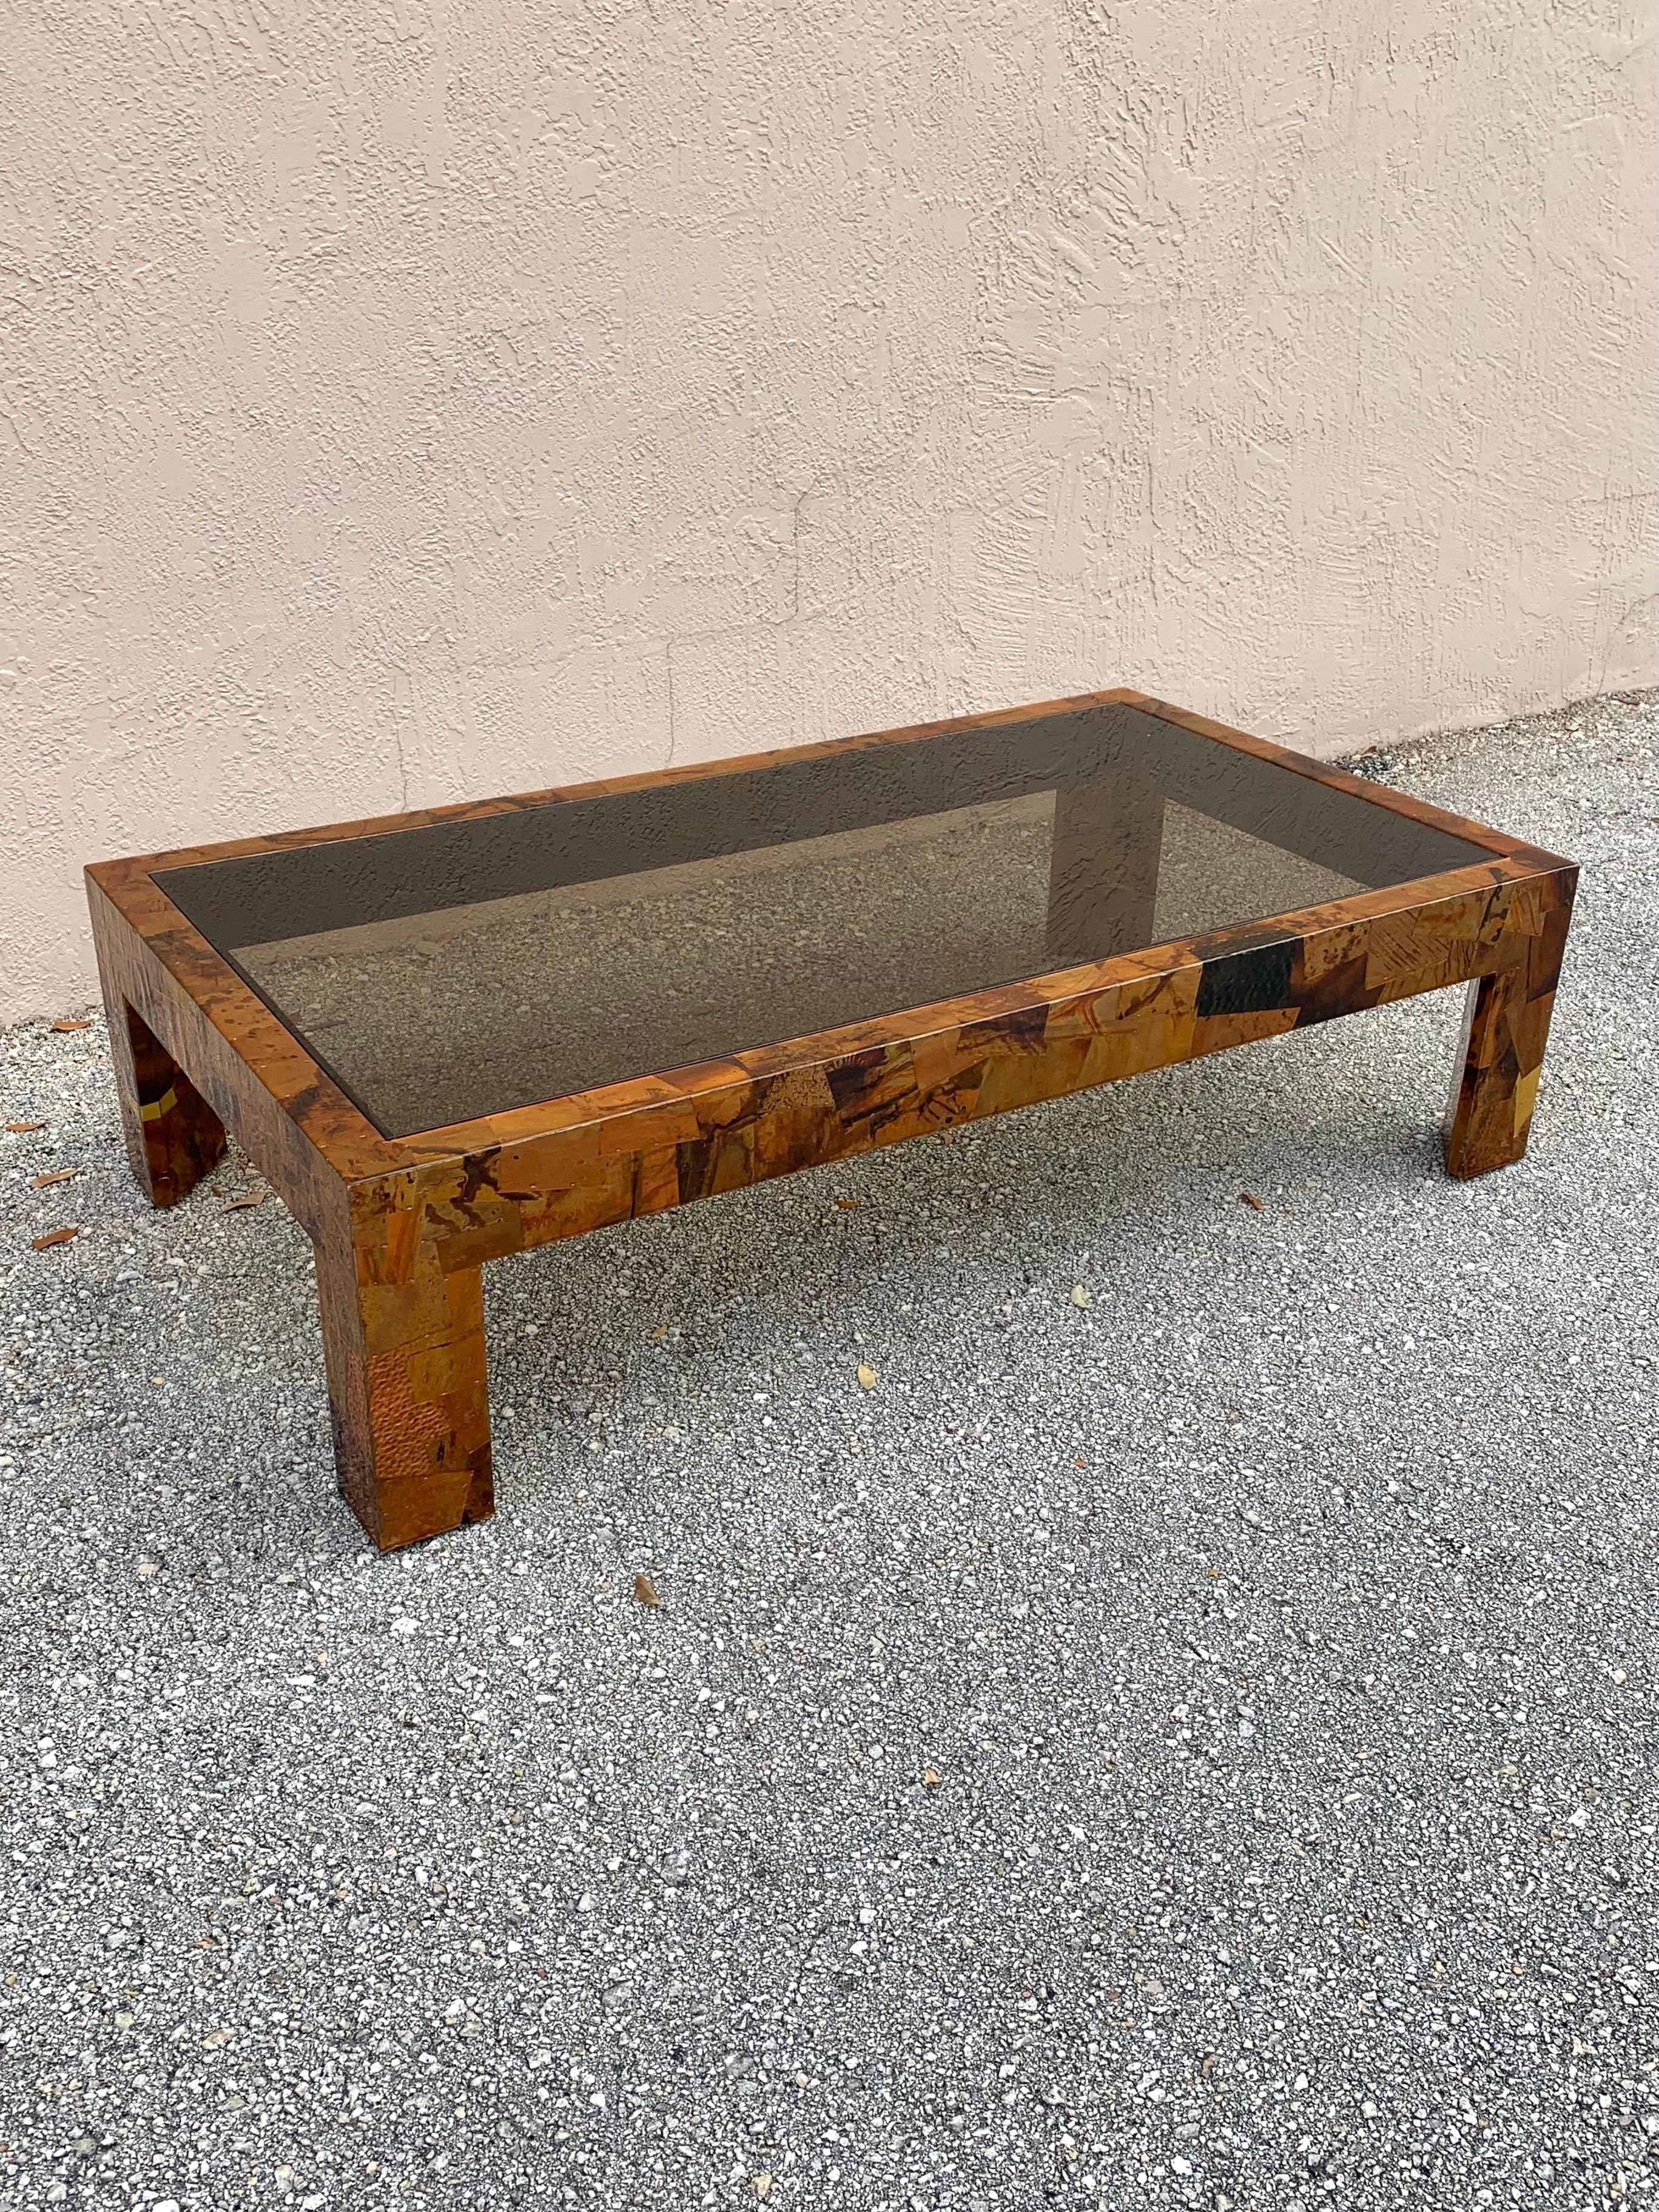 Studio made copper and brass coffee table. Made to have a brutalist flair. The artist used different pieces of textured and patinated copper and clean brass to cover the entire coffee table. The plates are affixed with copper staples then covered